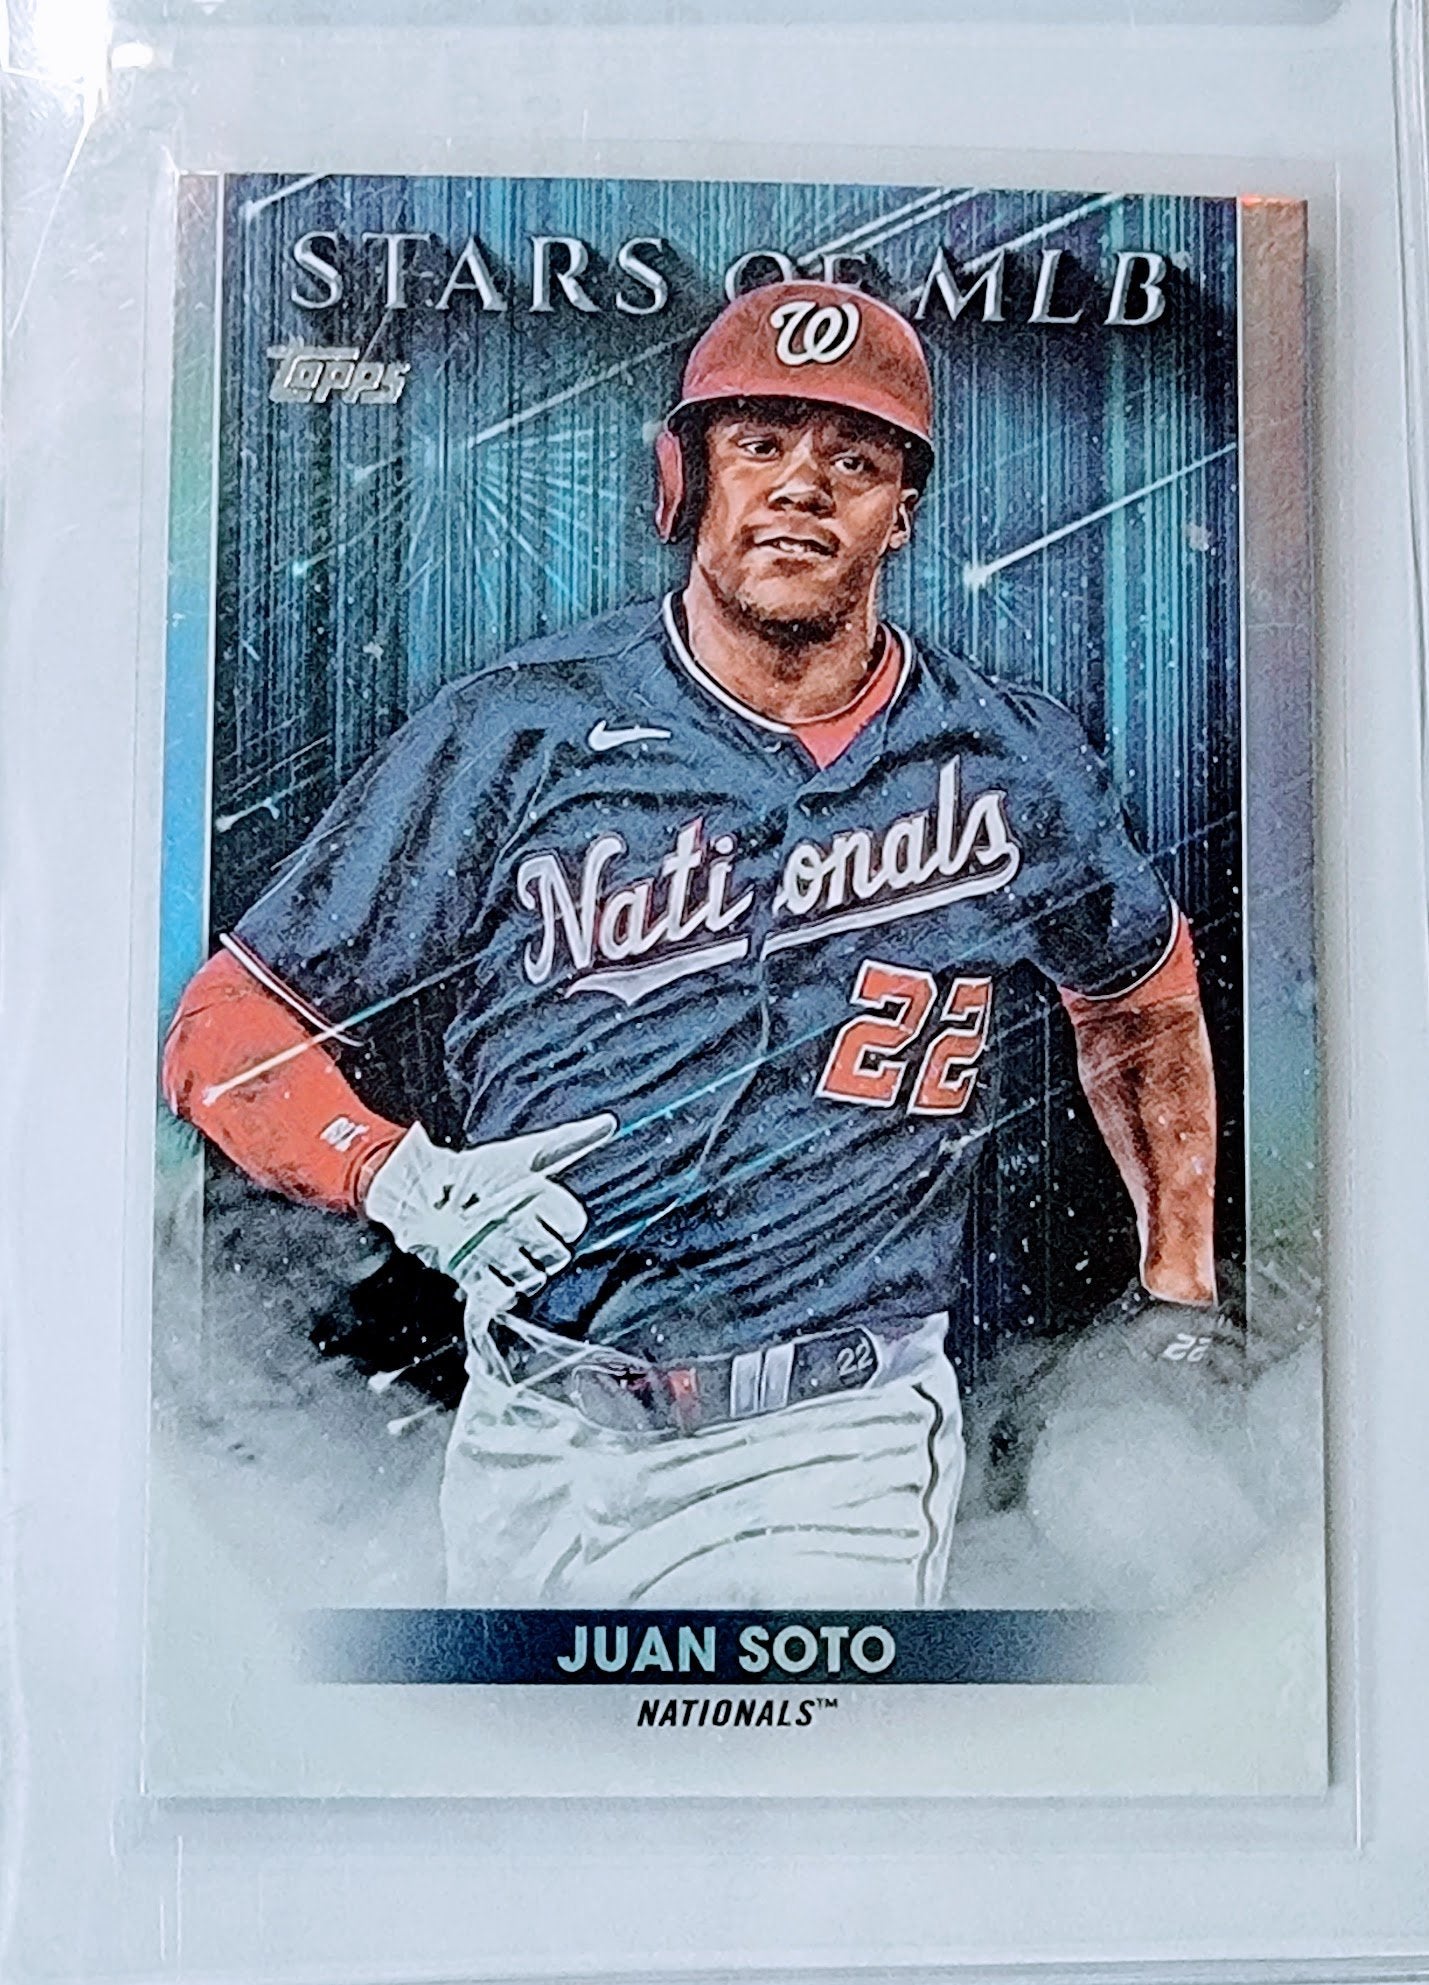 2022 Topps Juan Soto Stars of the MLB Baseball Trading Card GRB1 simple Xclusive Collectibles   